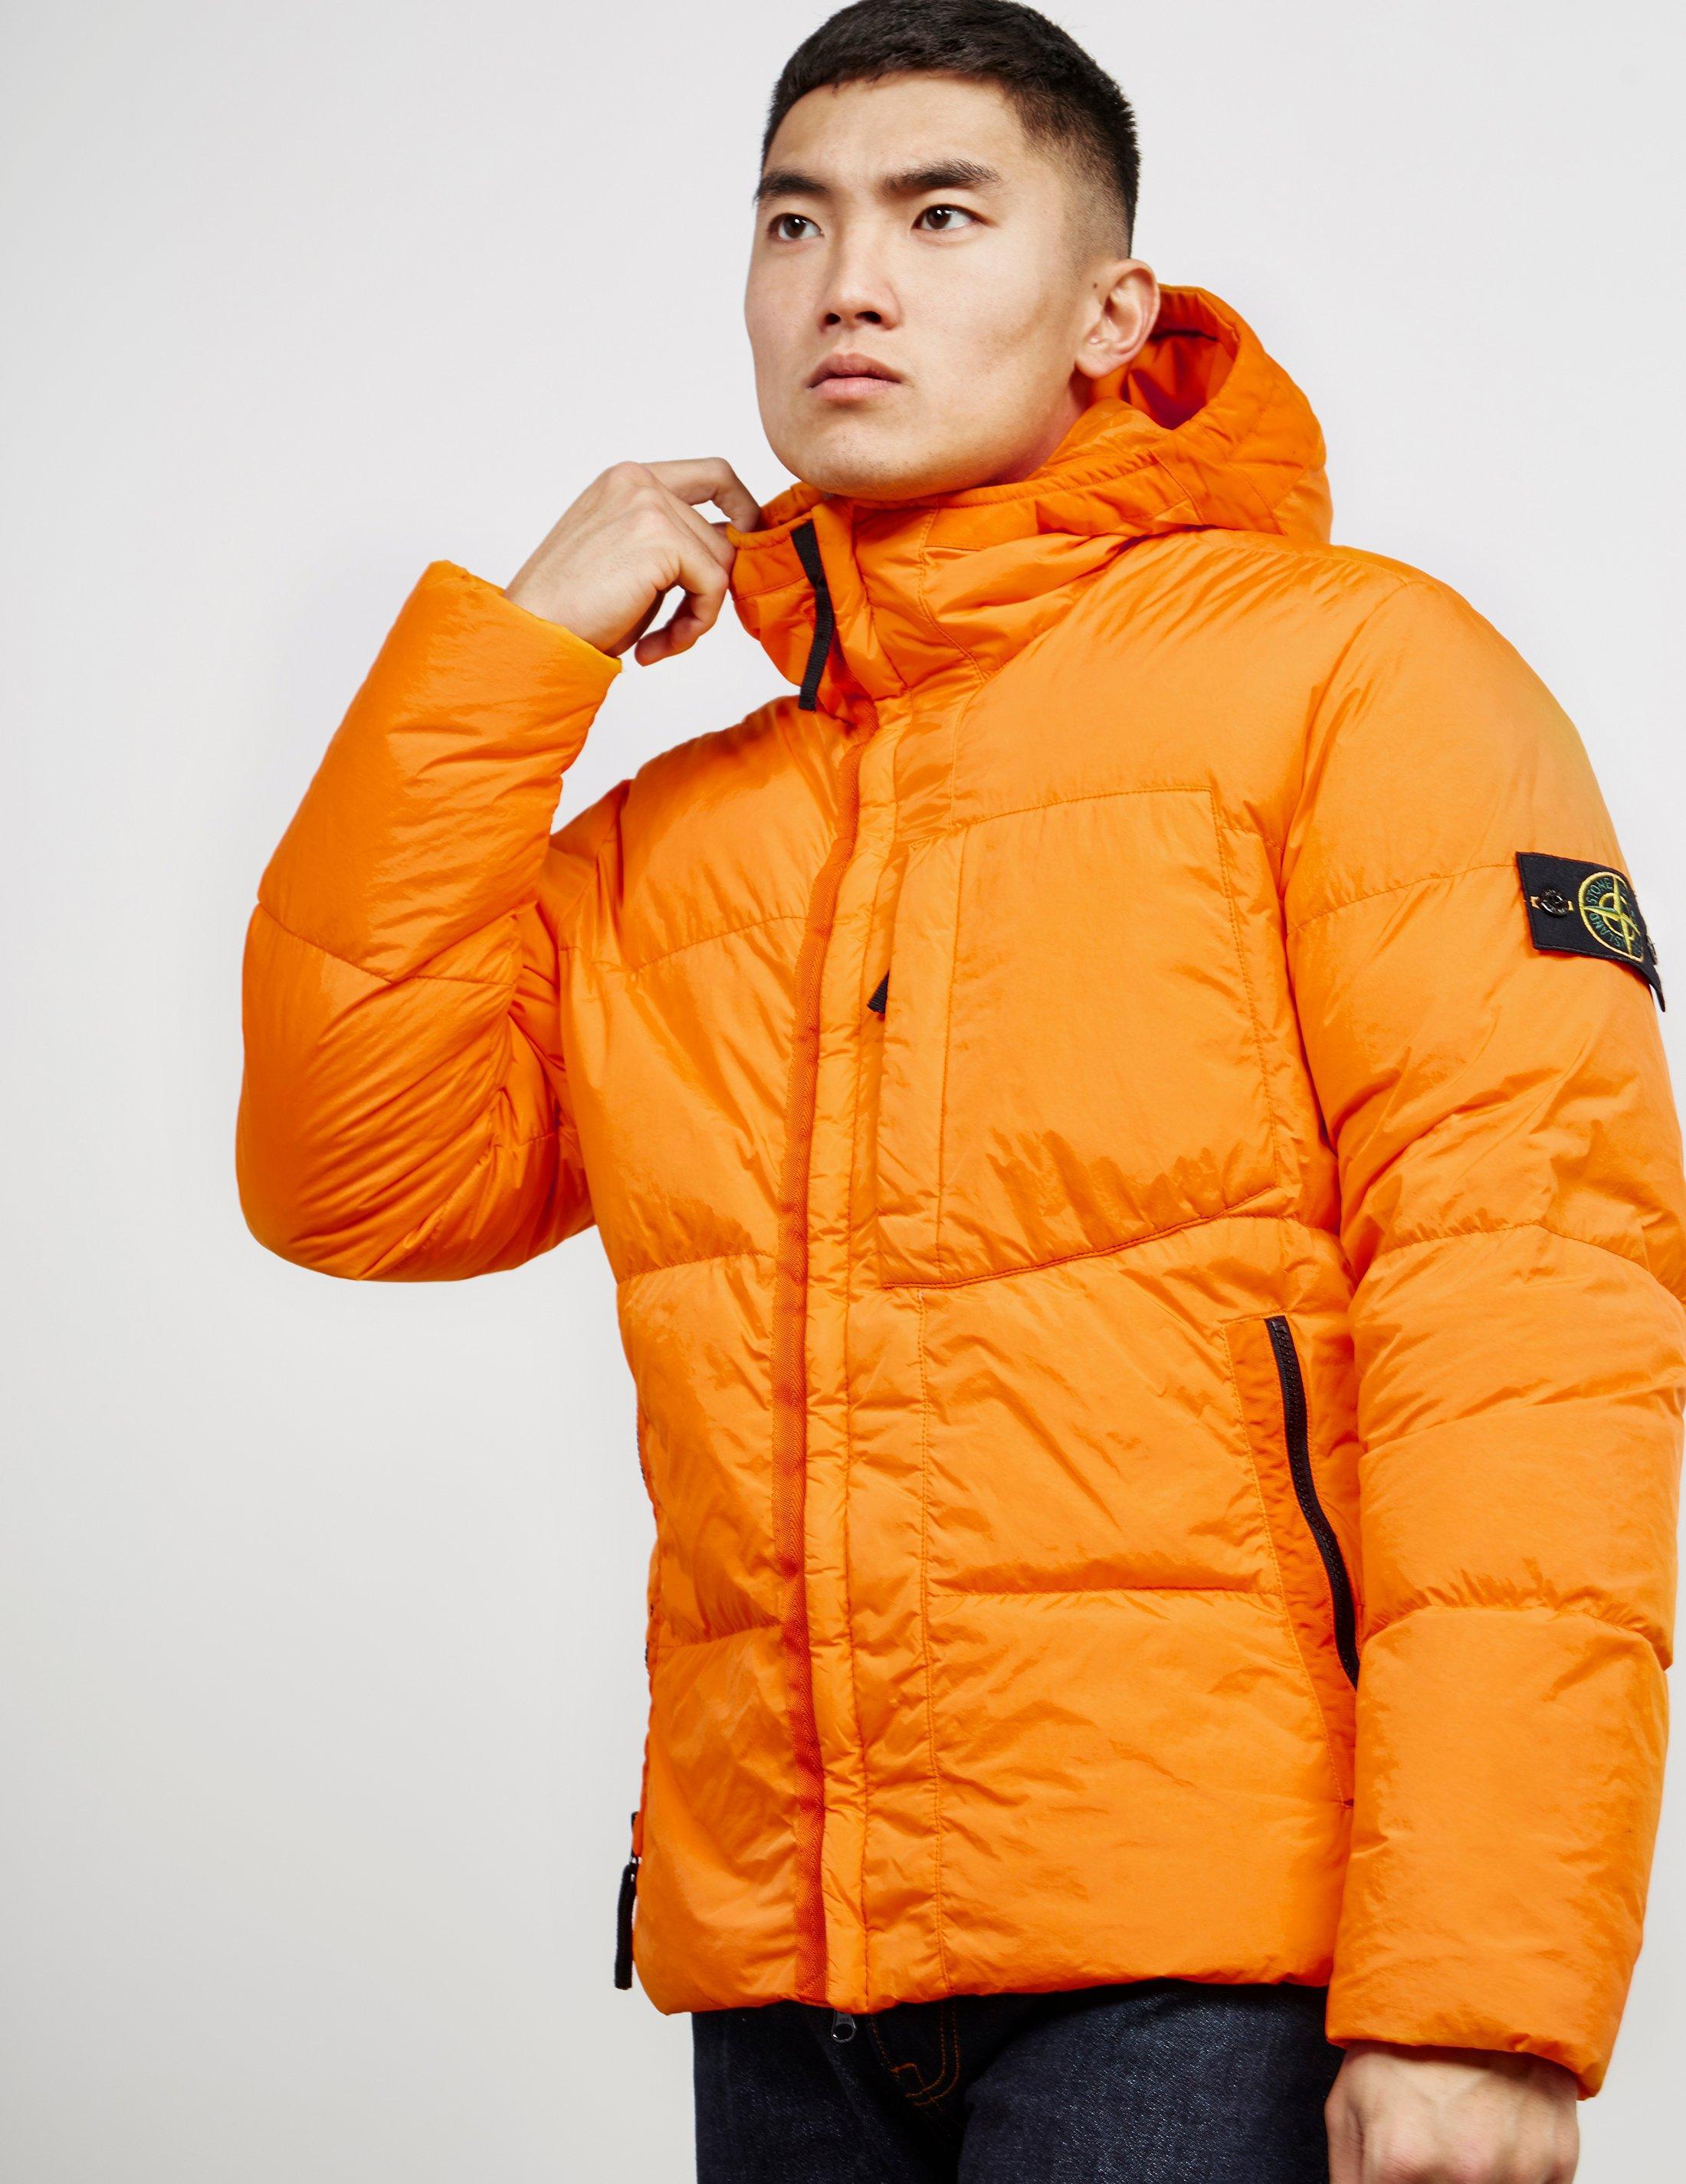 Stone Island Synthetic Garment Dyed Crinkle Jacket in Orange for Men - Lyst